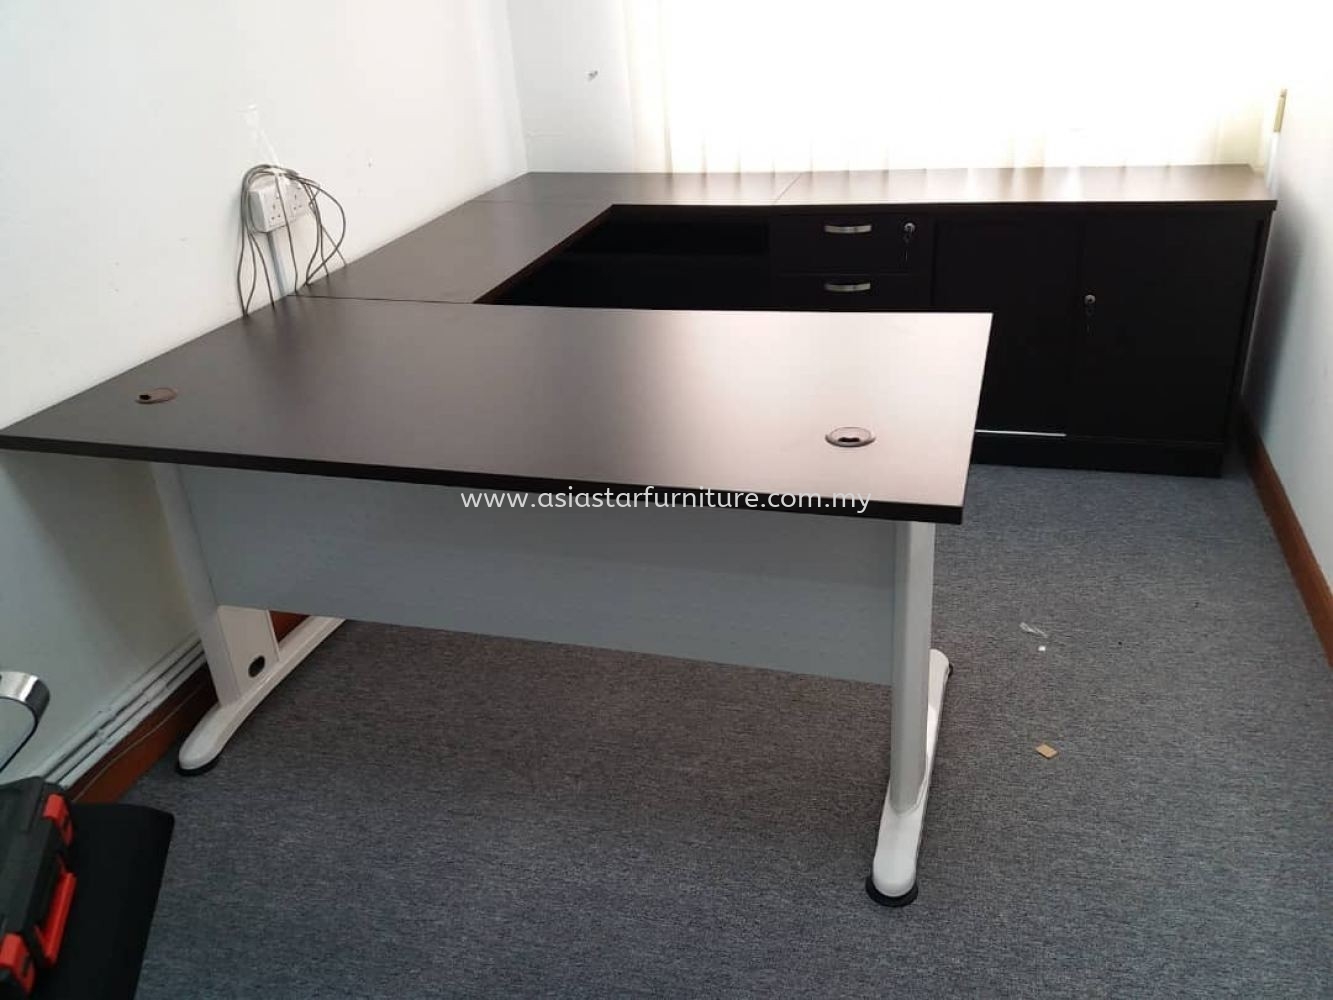 DELIVERY & INSTALLATION QT 188 EXECUTIVE OFFICE TABLE C/W LOW CABINET Q-YSP 7124 OFFICE FURNITURE MENARA SHELL, KUALA LUMPUR